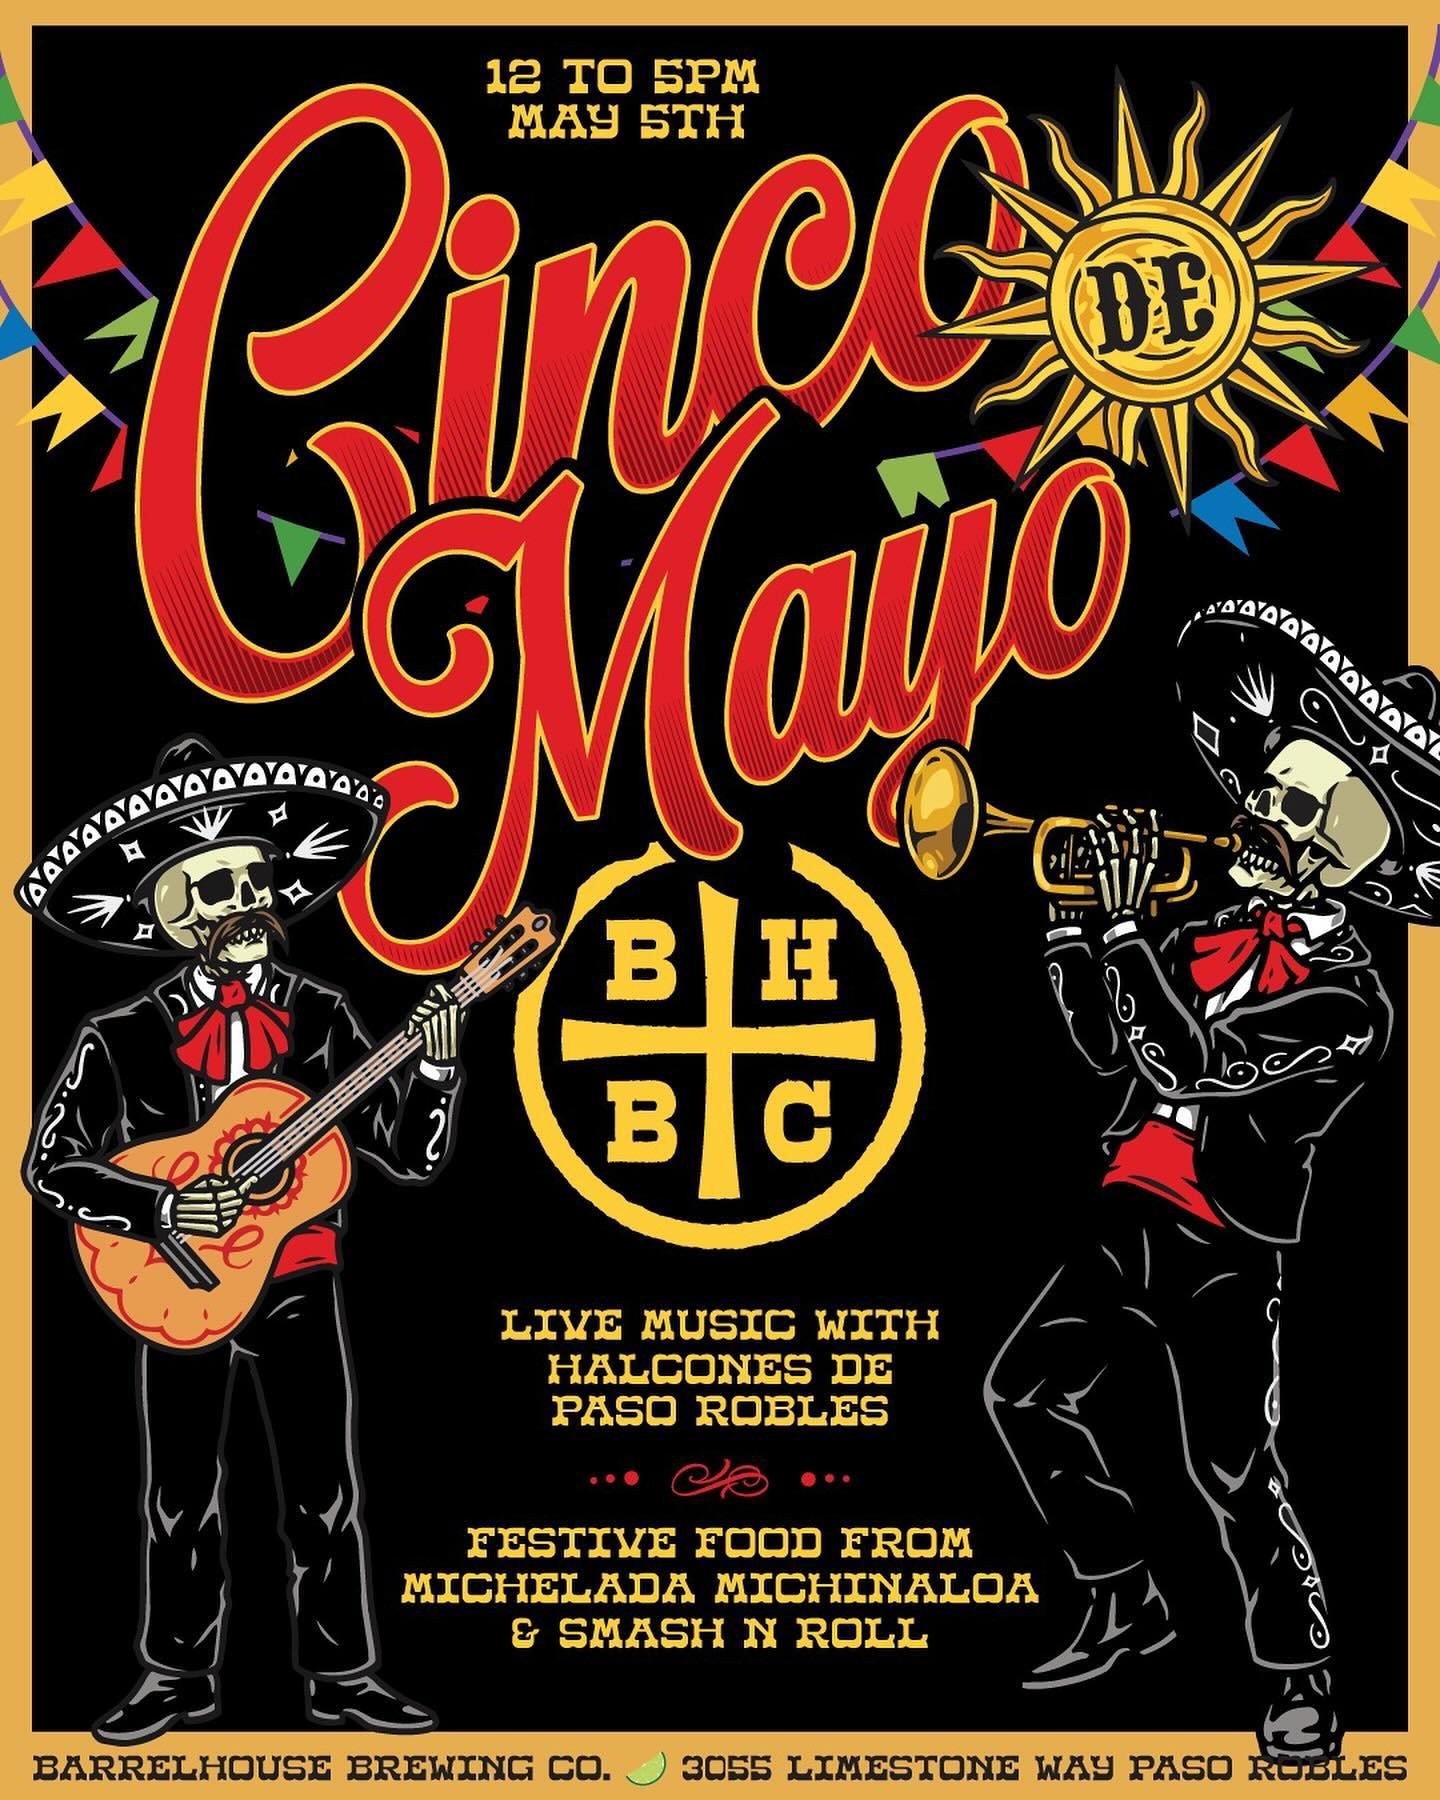 Cinco De Mayo is here, and the party&rsquo;s at BarrelHouse Brewing Co!

Join us from 12-5 PM for an epic fiesta filled with live music by Halcones de Paso Robles starting at 1 PM, mouthwatering Quesabirria Tacos, Carne Asada Tacos, Ceviche, Michelad